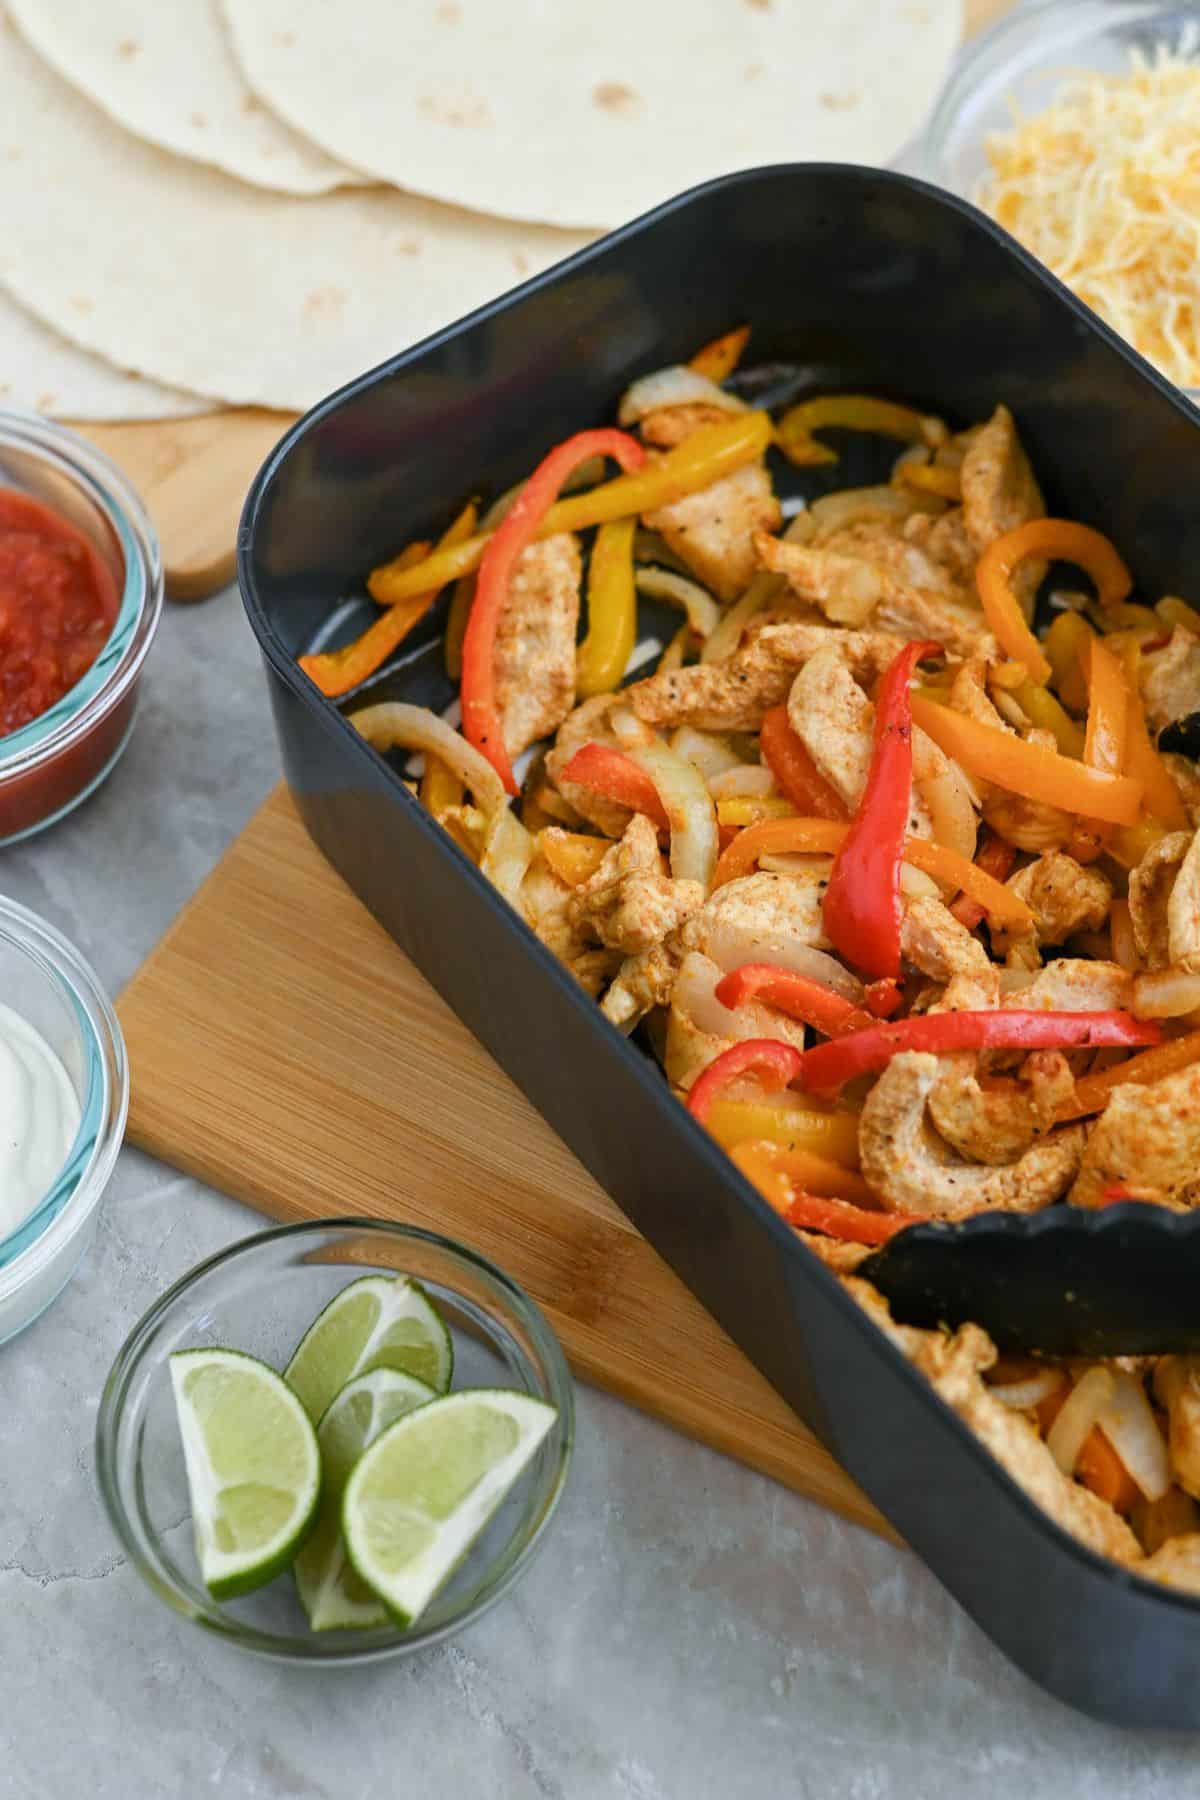 A dish of chicken fajitas with sliced bell peppers, served with sides of shredded cheese, salsa, sour cream, lime wedges, and tortillas.